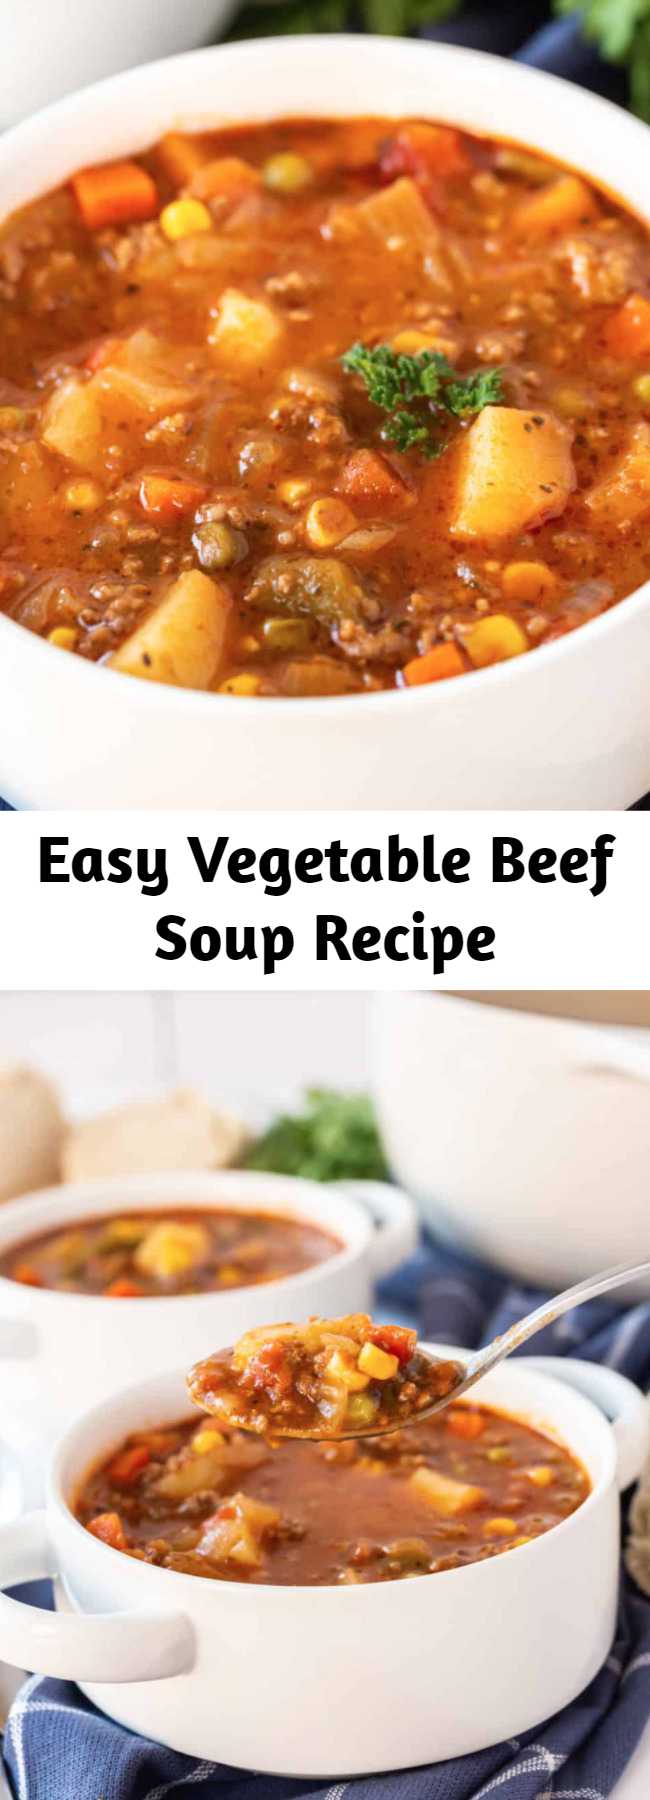 Easy Vegetable Beef Soup Recipe - When it comes to comfort this Vegetable Beef Soup is where it's at. With a short list of ingredients this easy soup is delicious, hearty and satisfies the family! #soup #beef #hearty #recipes #delicious #recipe #tasty #easyrecipe